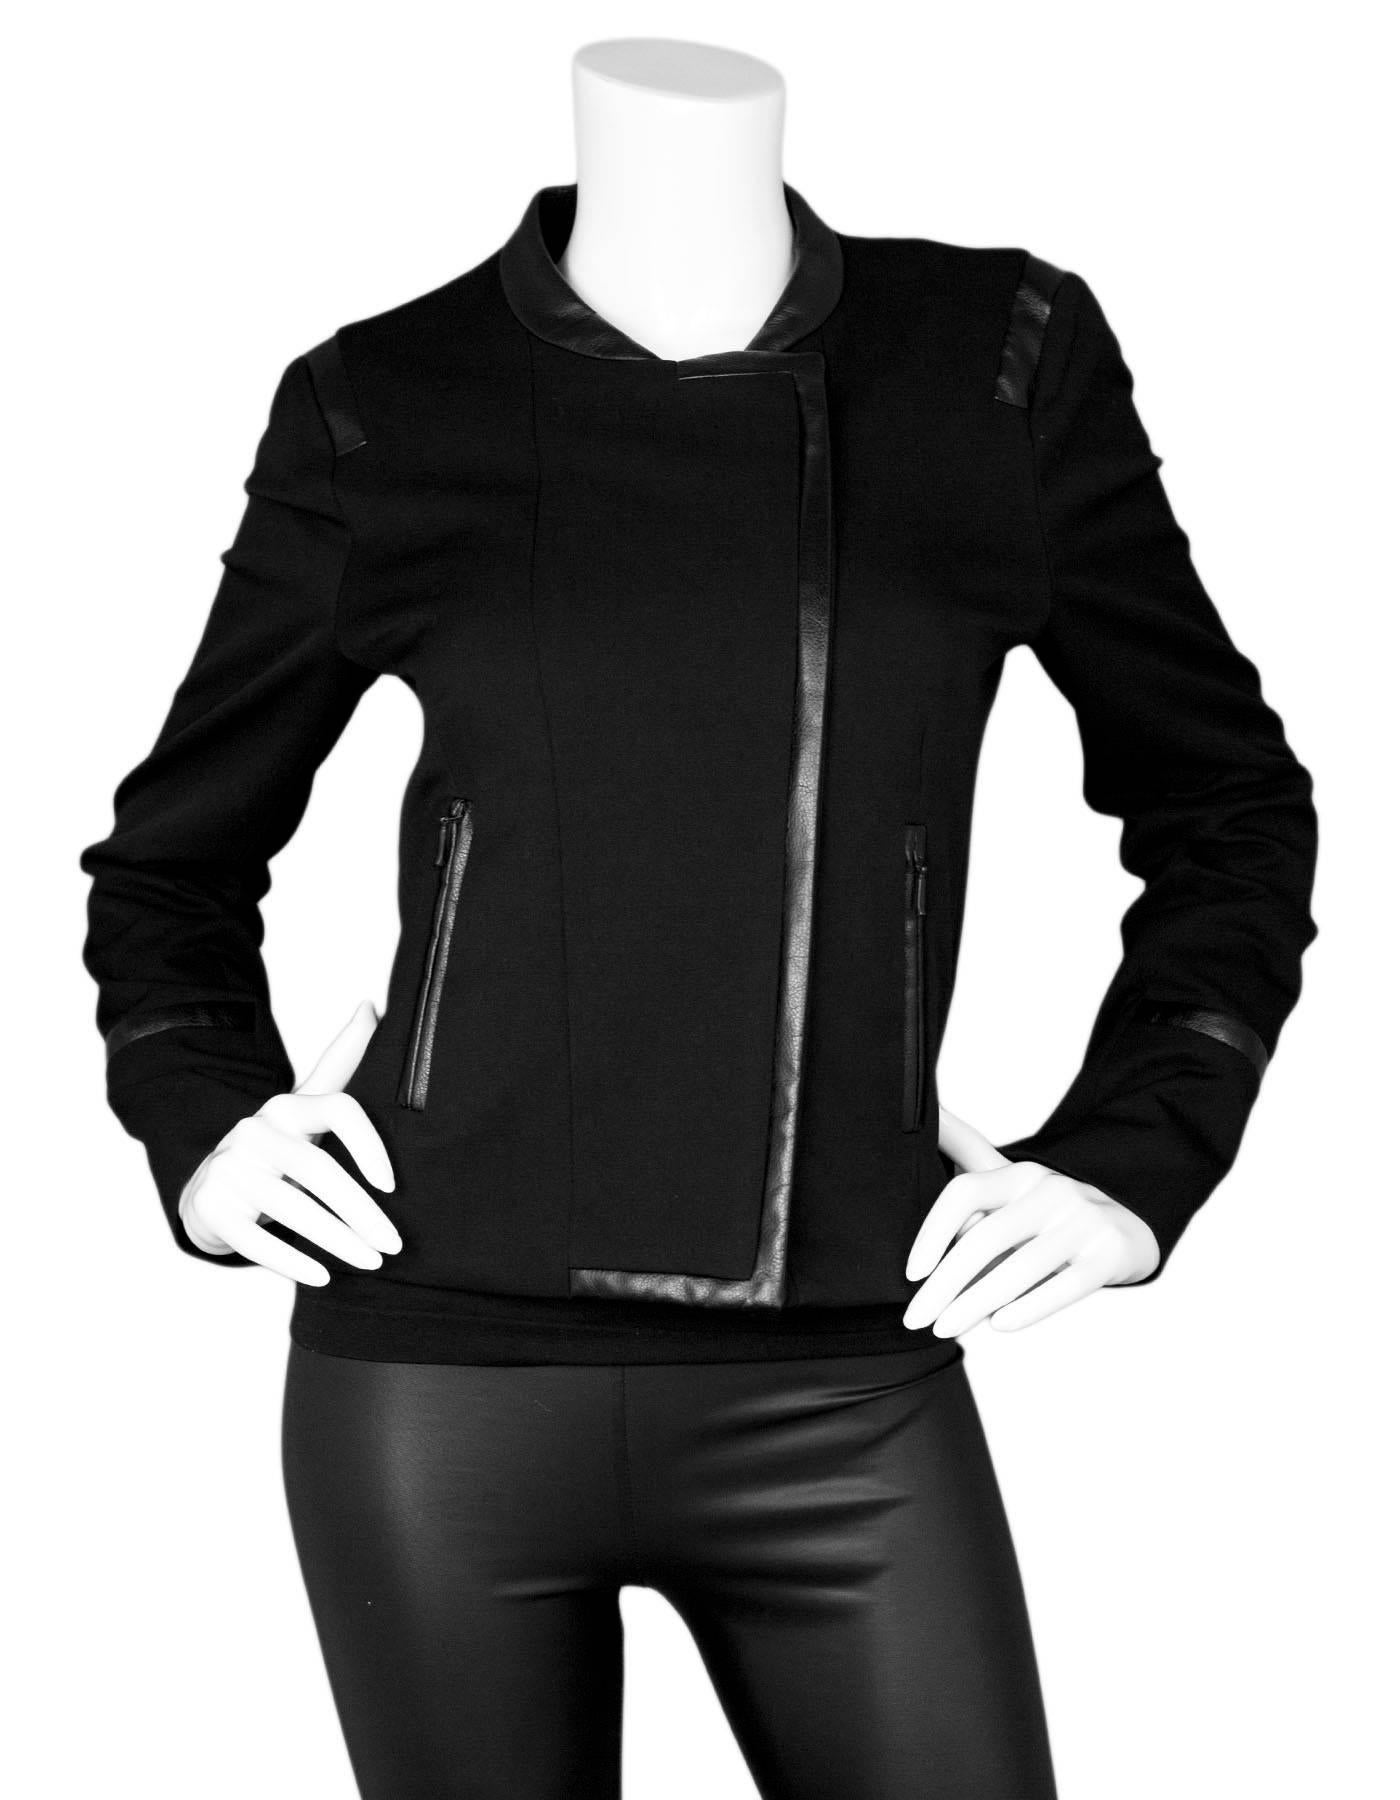 Comptoir Des Cotonniers Black Jacket with Faux Leather Trim Sz FR40

Made In: France
Color: Black
Composition: 64% Polyester, 31% viscose, 5% elastane
Lining: Black textile
Closure/Opening: Front zip closure
Overall Condition: Excellent pre-owned